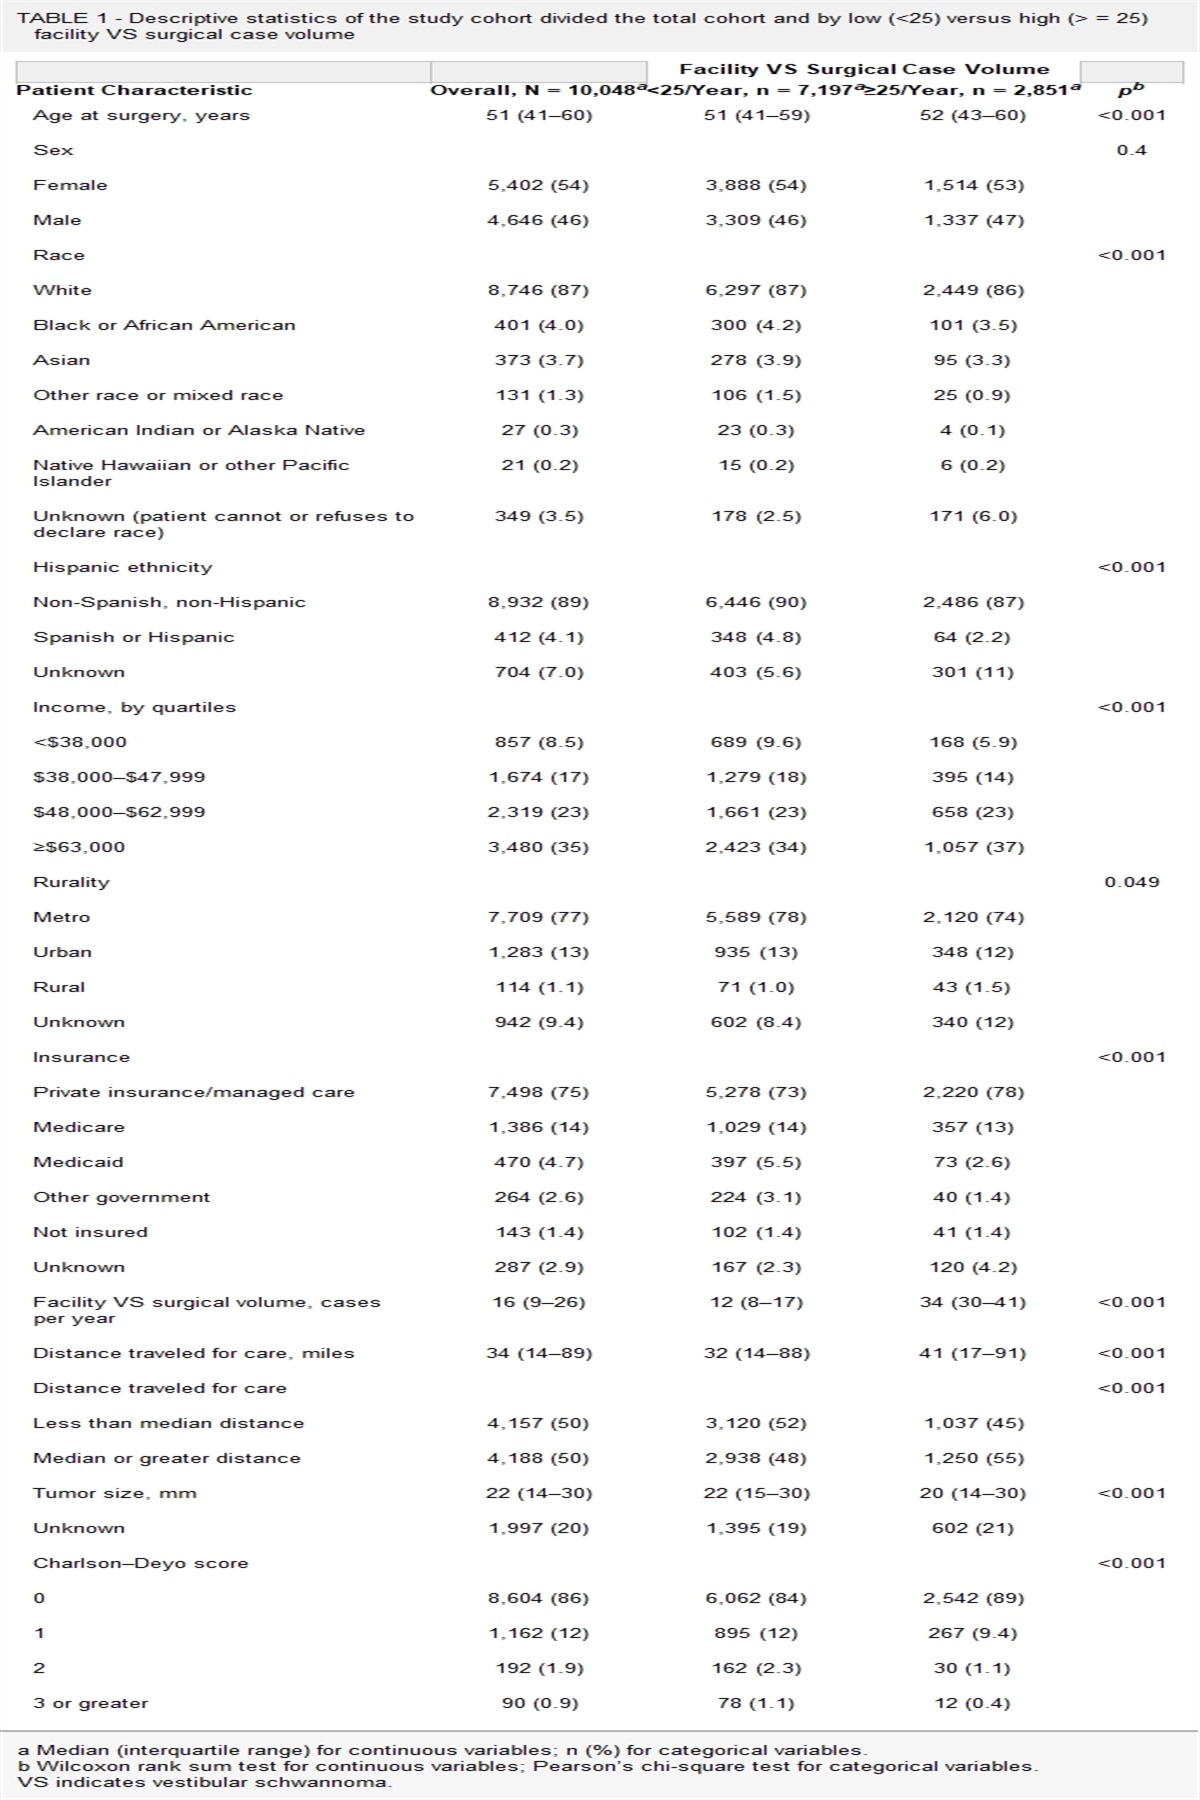 Socioeconomic Disparities in the Pursuit of Care at a High-Volume Institution for Surgical Resection of Vestibular Schwannomas